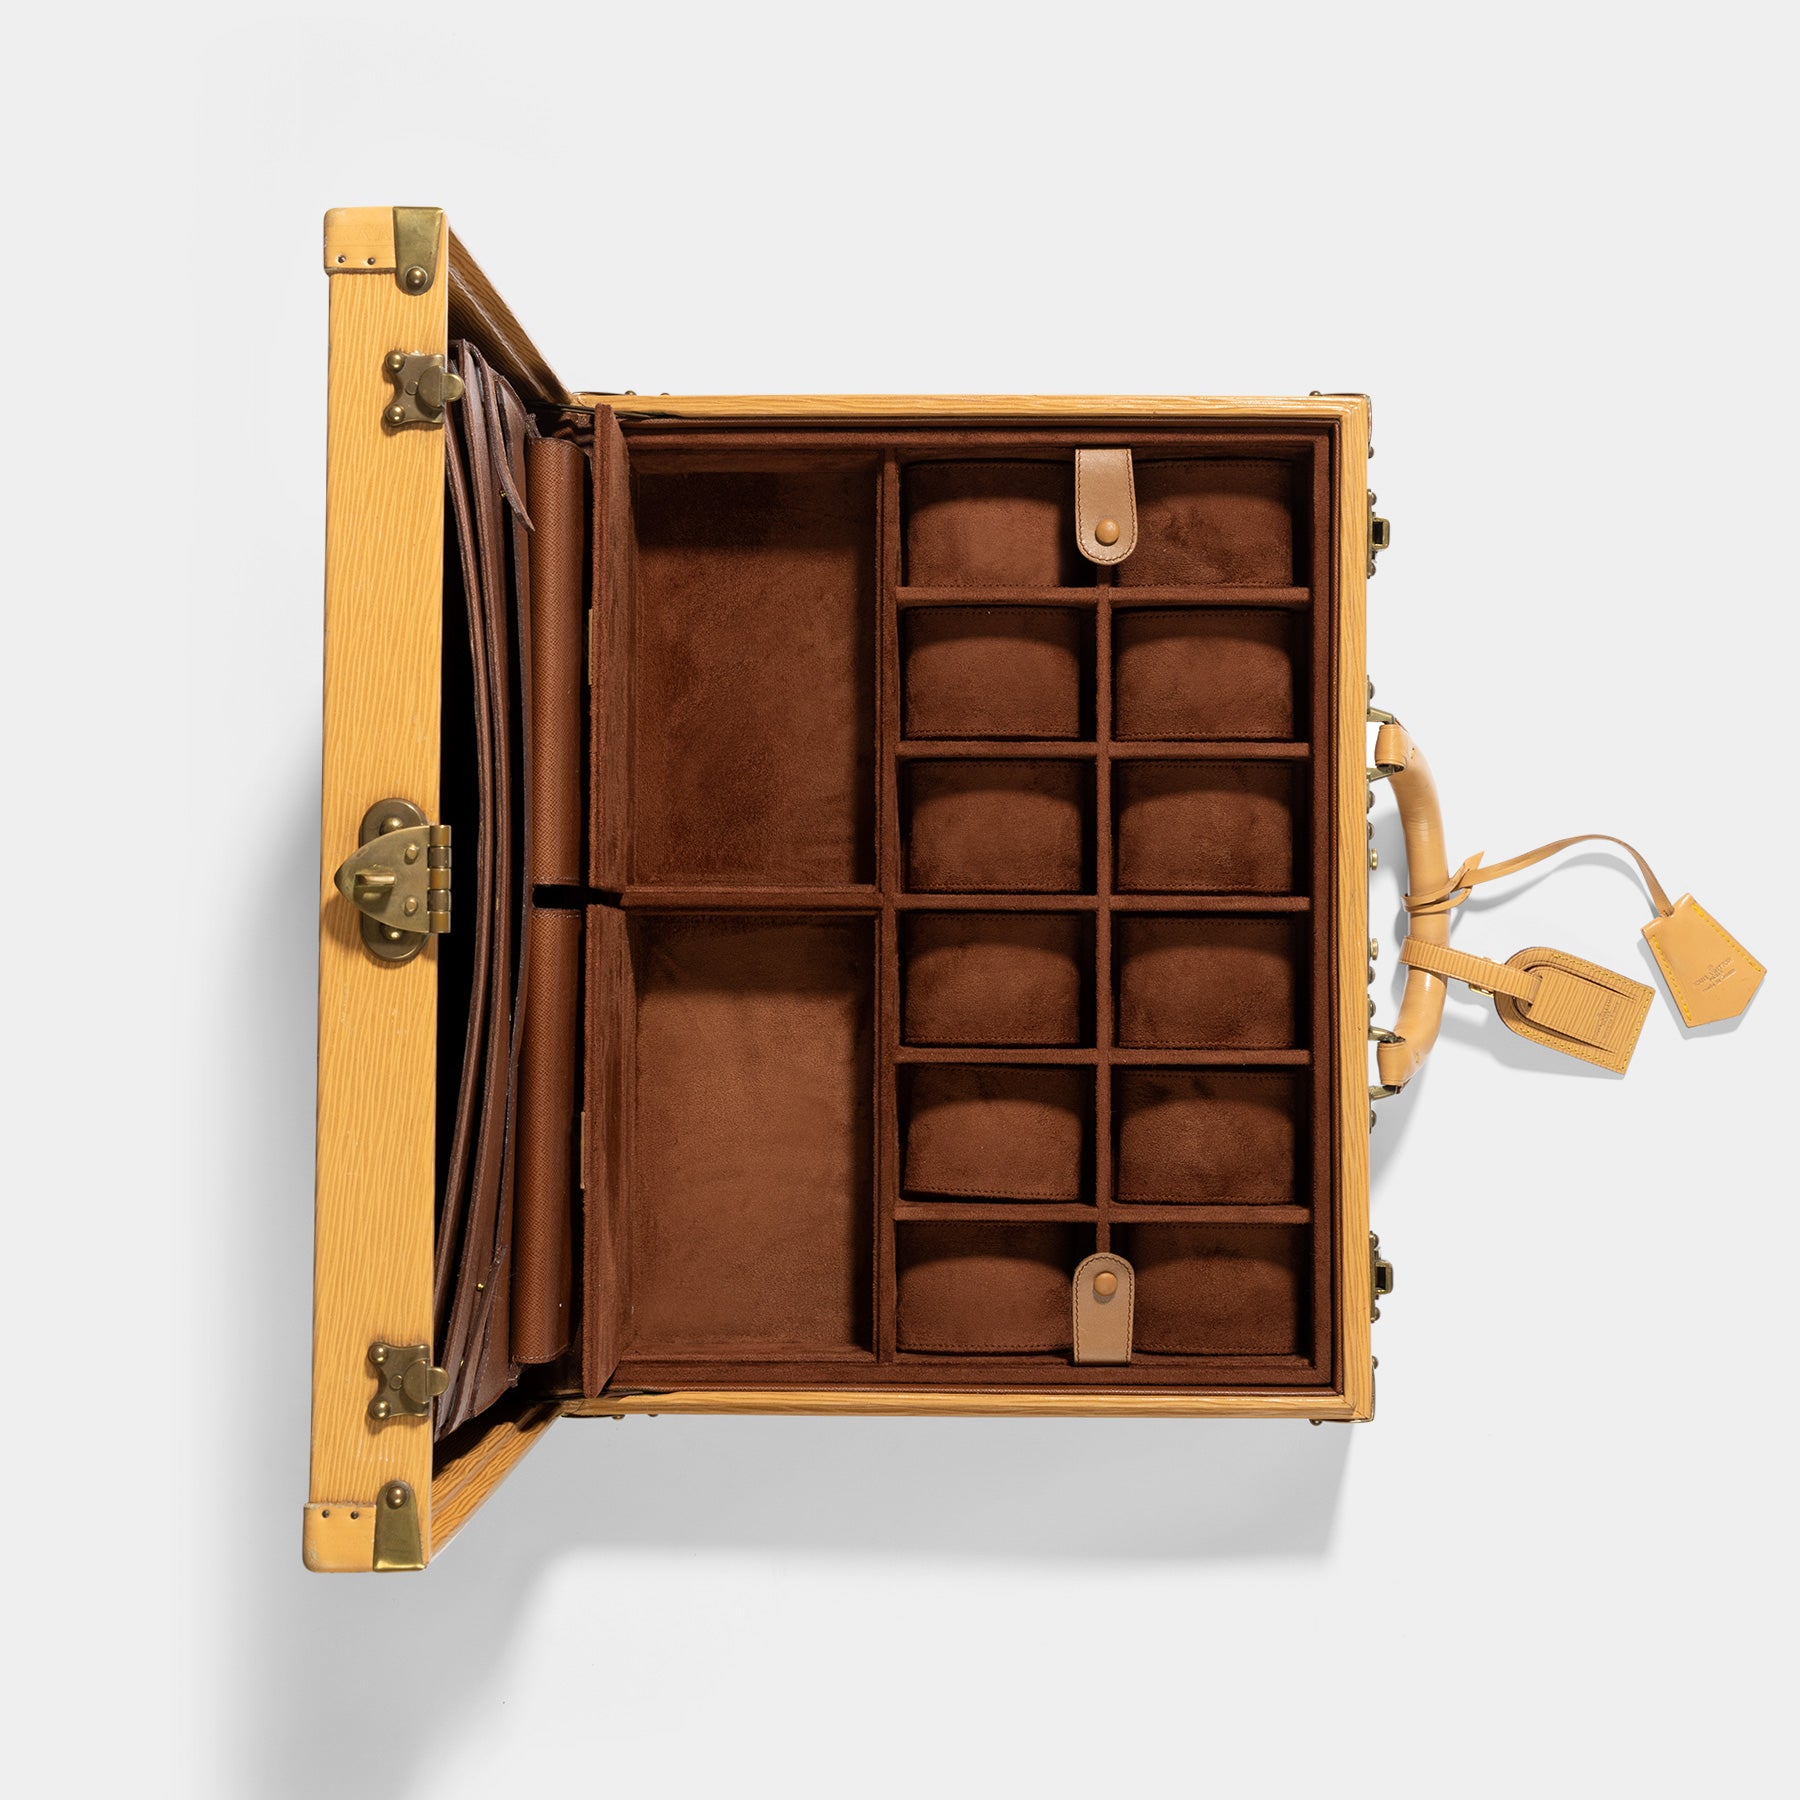 This leather suitcase from the Louis Vuitton brand is very refined